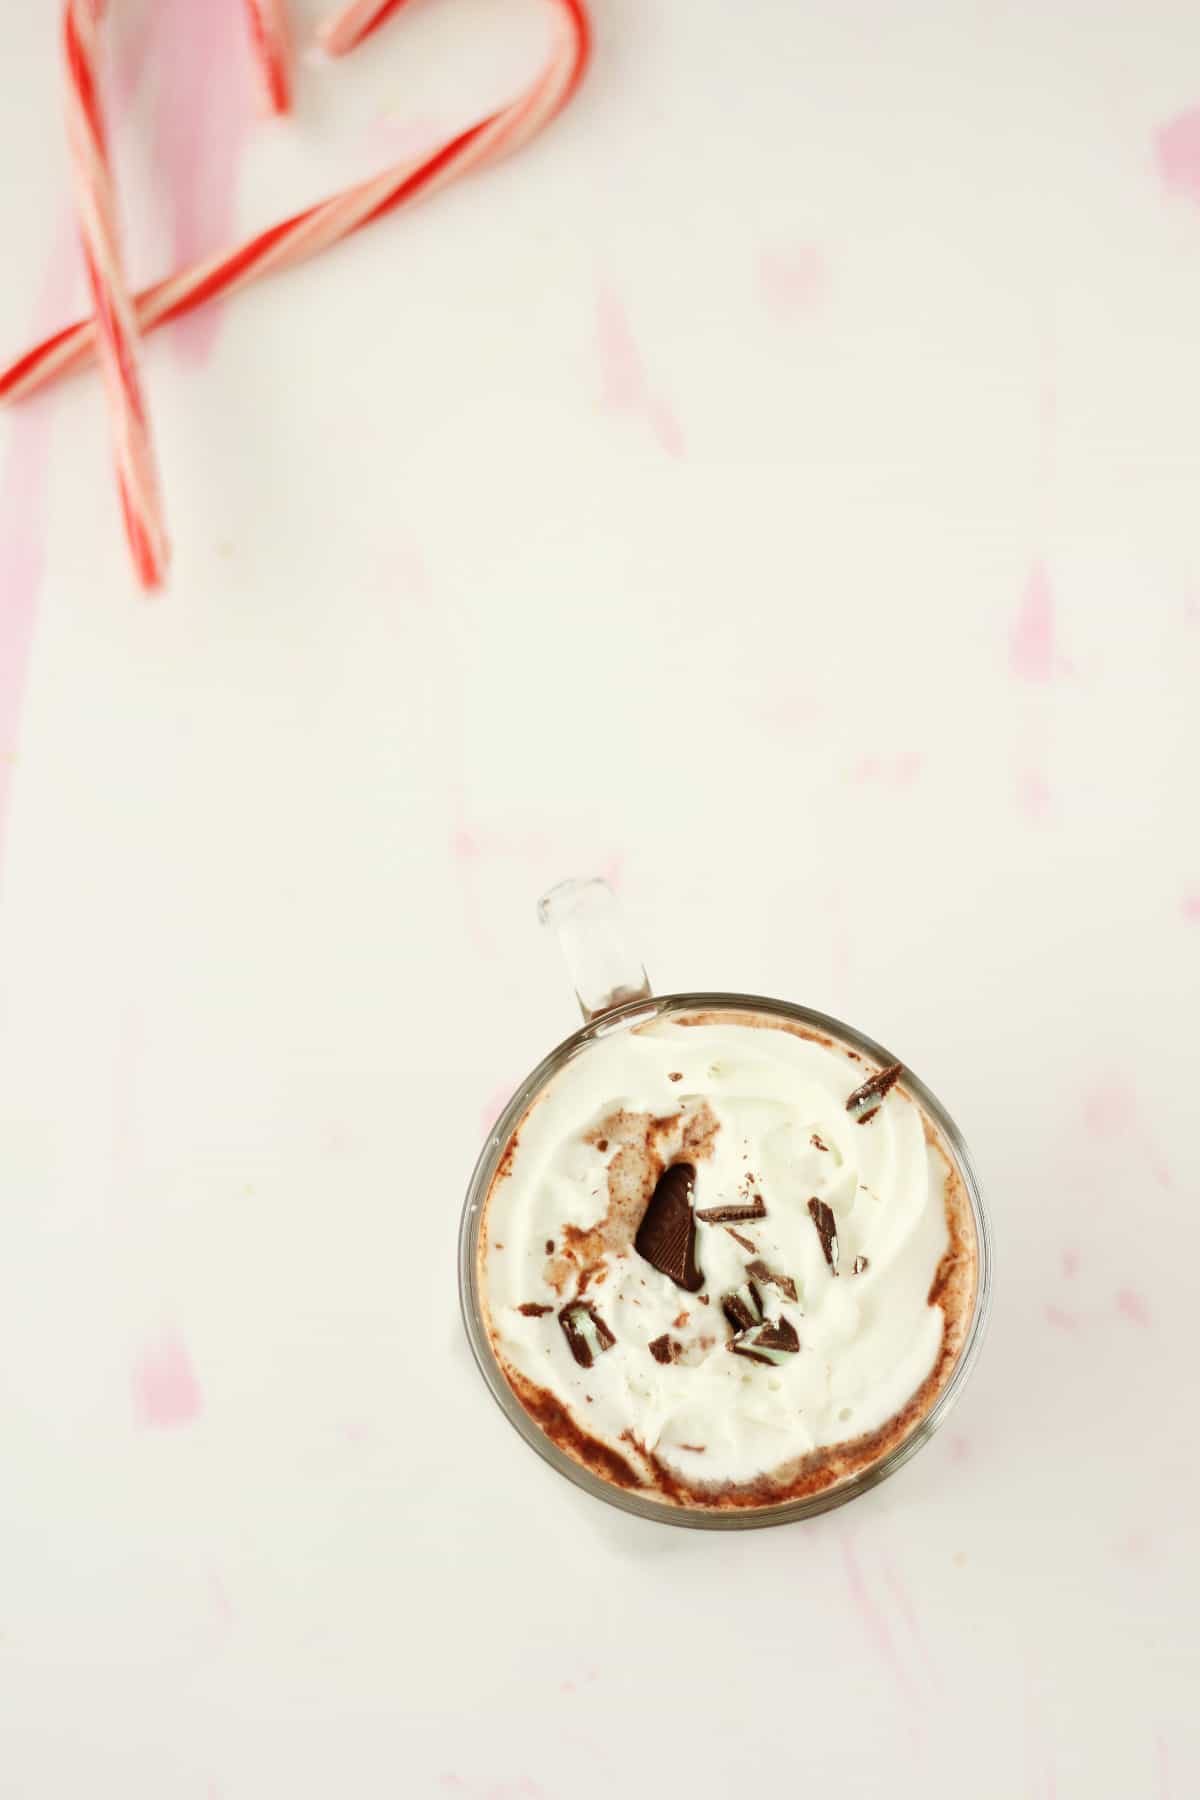 Overhead view of a clear mug filled with hot chocolate, whipped cream and chocolate shavings. There are a few candy canes blurred in the background.